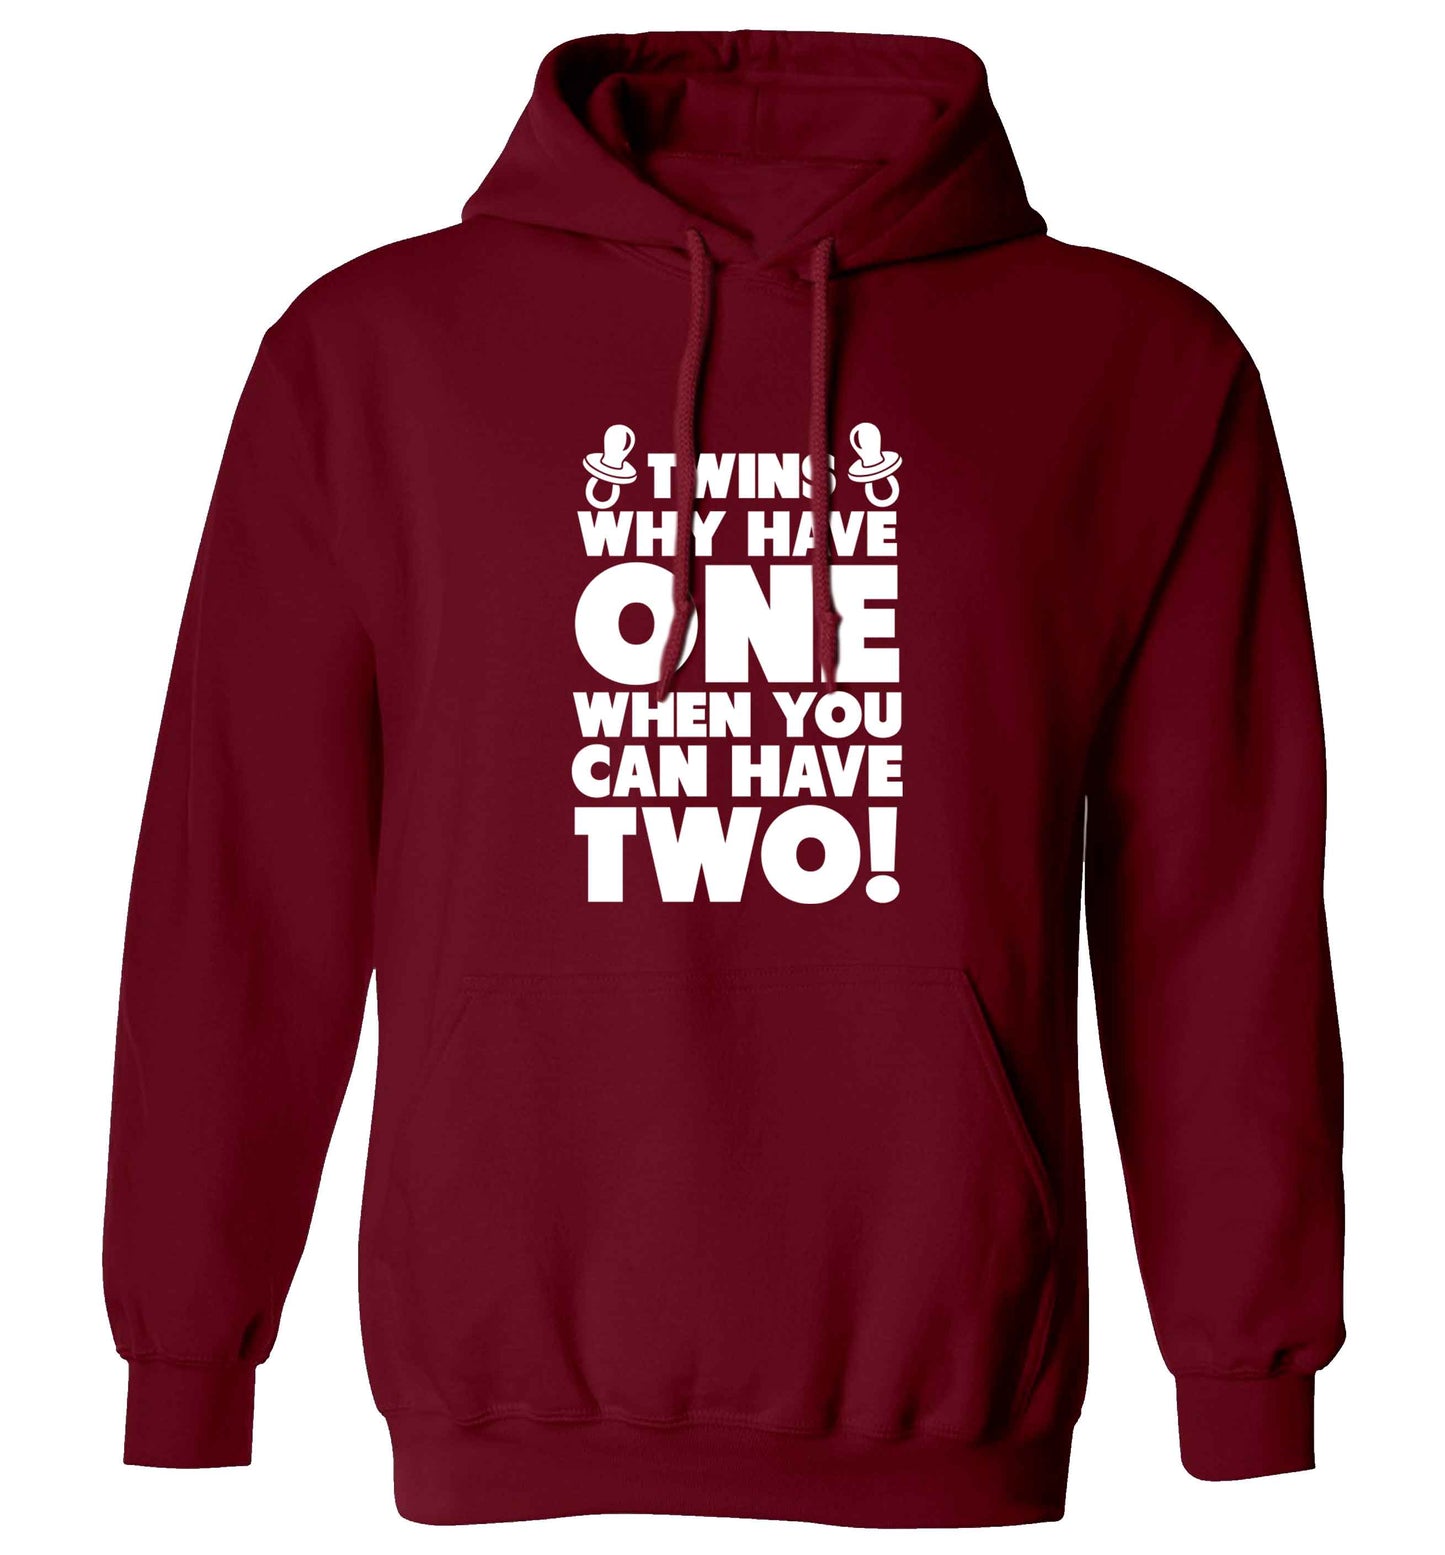 Twins why have one when you can have two adults unisex maroon hoodie 2XL